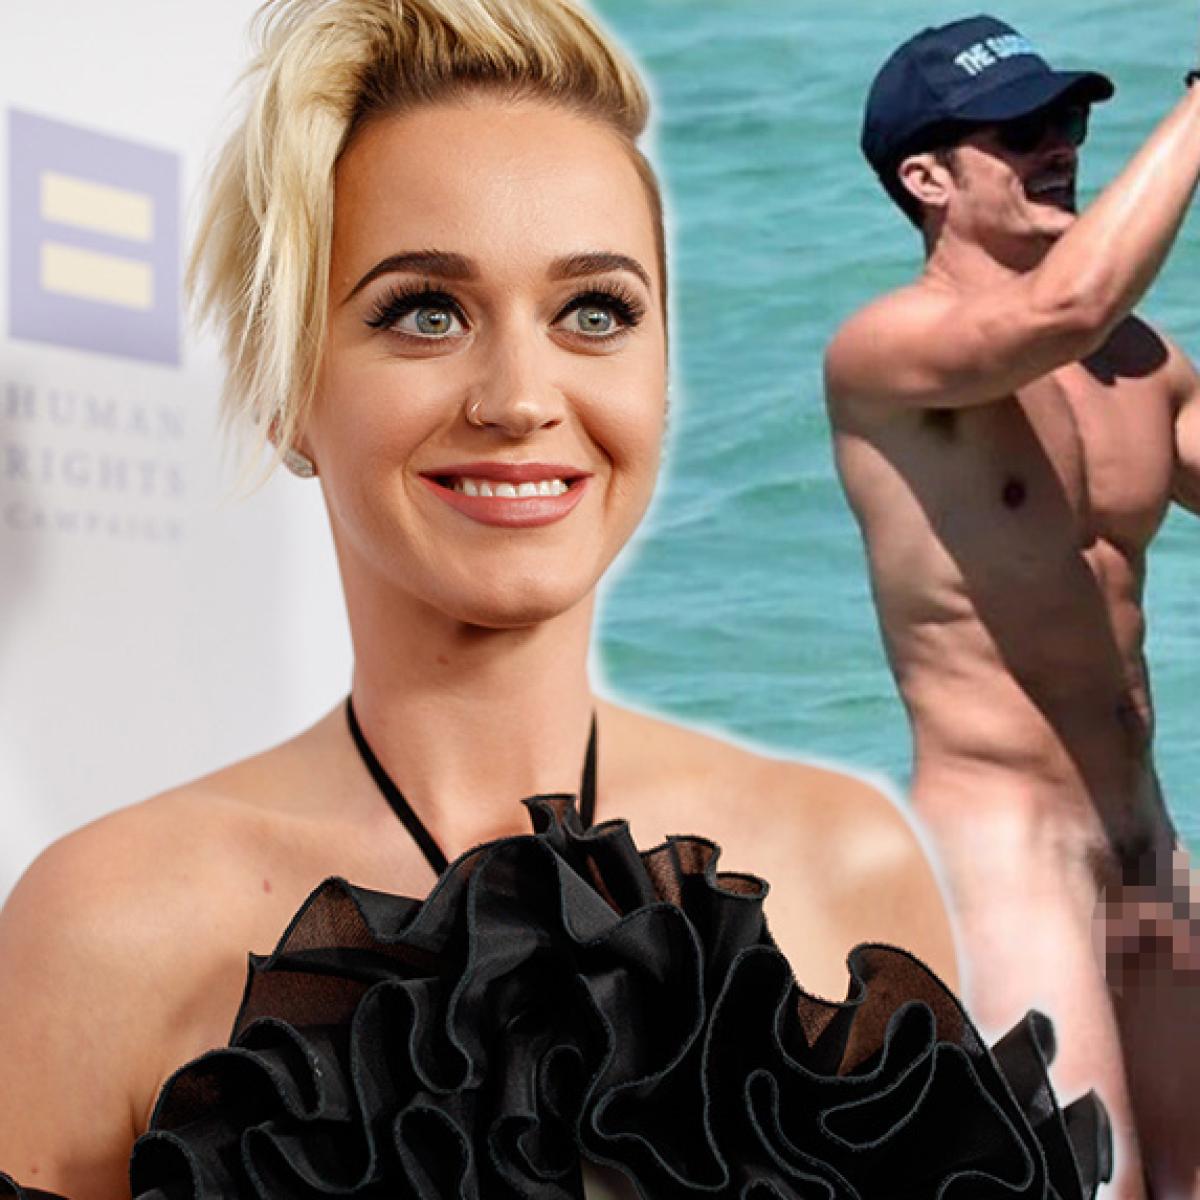 Cap Katy Perry Porn - Katy Perry Reveals Truth Of Those Orlando Paddle Board Pics